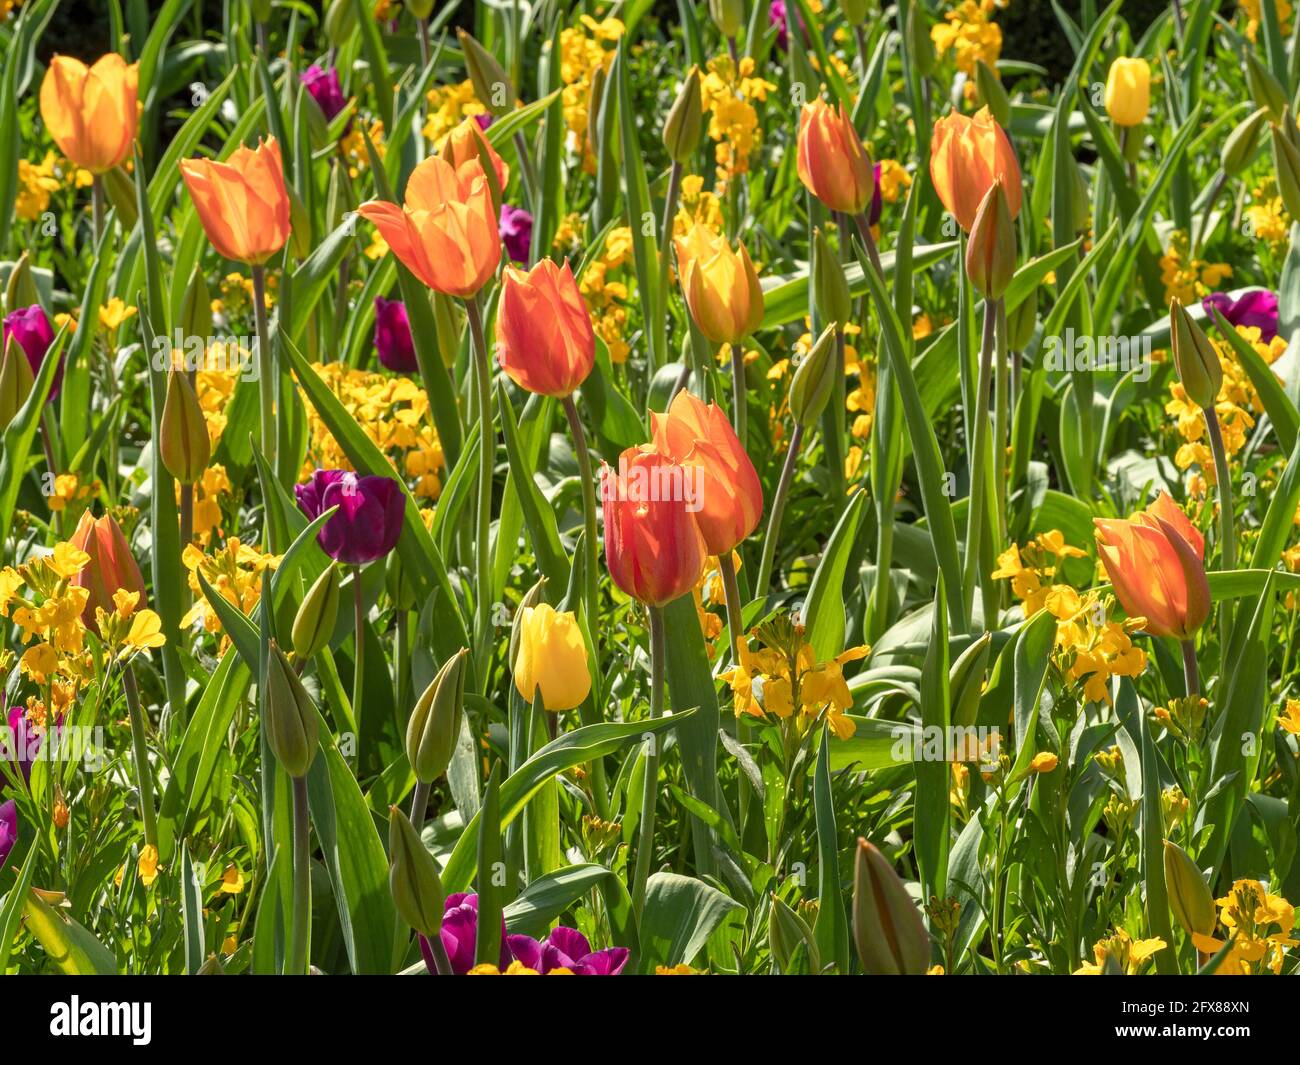 Mixed tulips and wallflowers in a garden Stock Photo